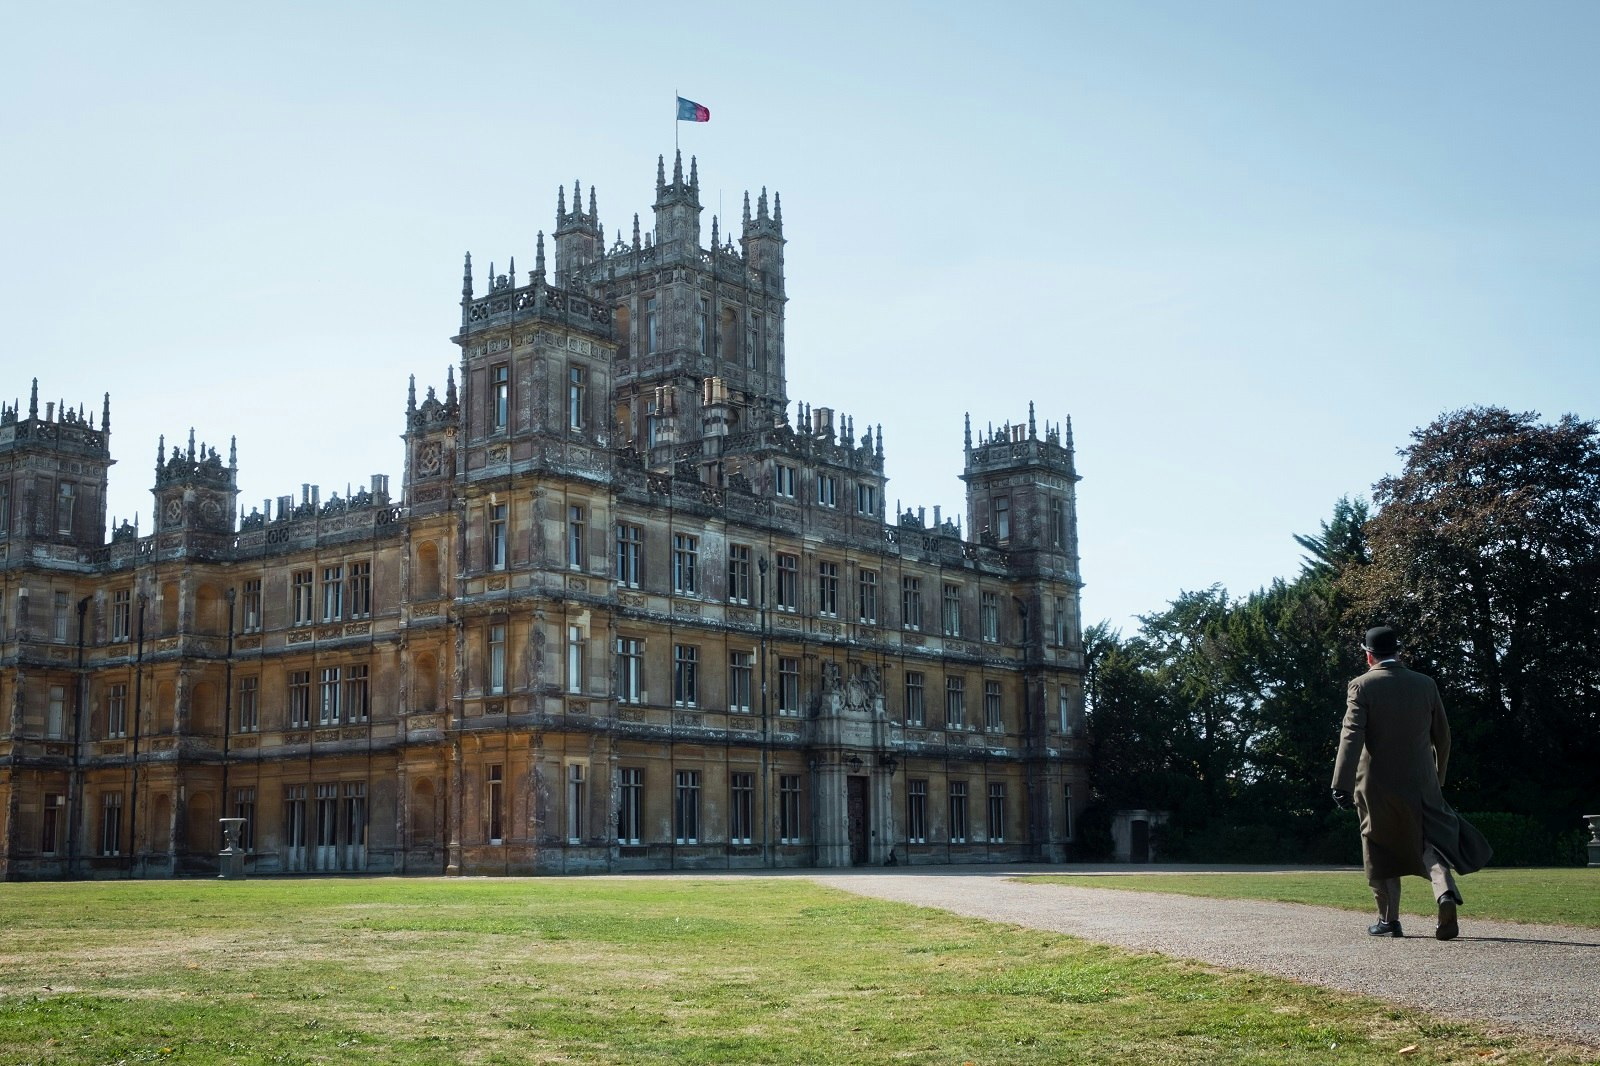 A man in a long beige coat and a bowler hat strides down the path towards Highclere Castle, which is the filming location for Downton Abbey.